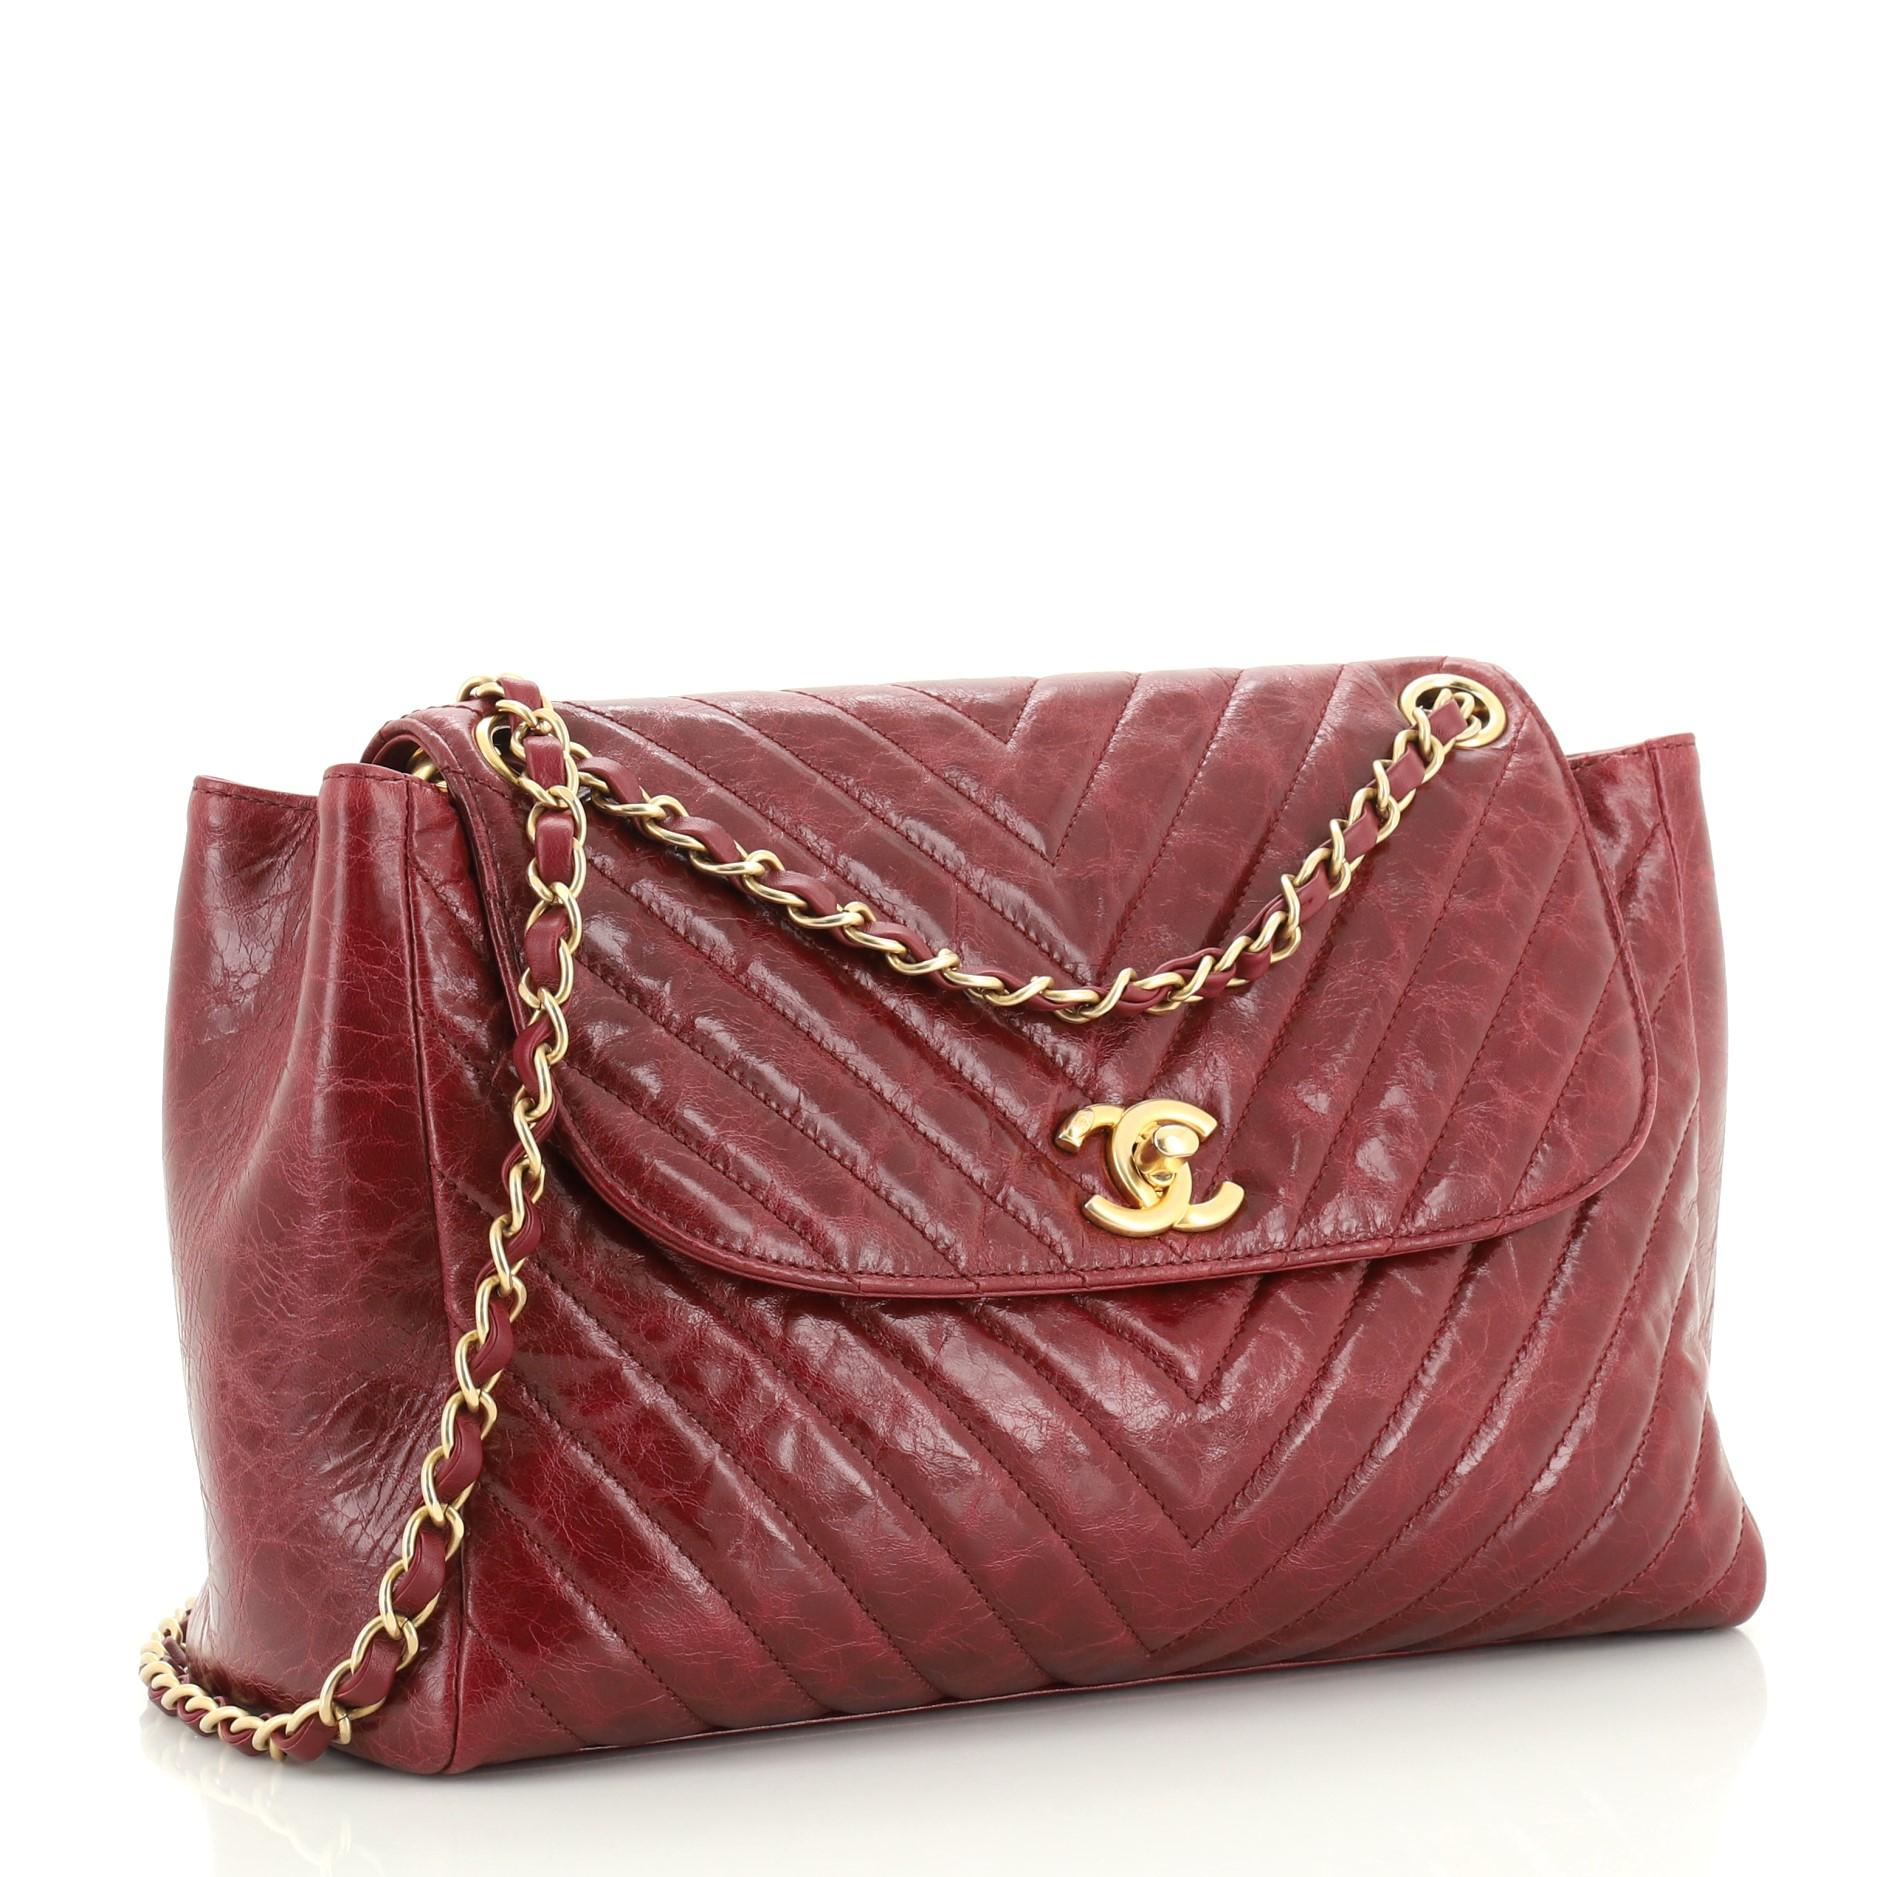 This Chanel Classic CC Hampton Flap Bag Chevron Aged Lambskin Medium, crafted from red chevron aged lambskin leather, features woven-in leather chain strap and aged gold-tone hardware. Its CC turn-lock closure opens to a red fabric interior.